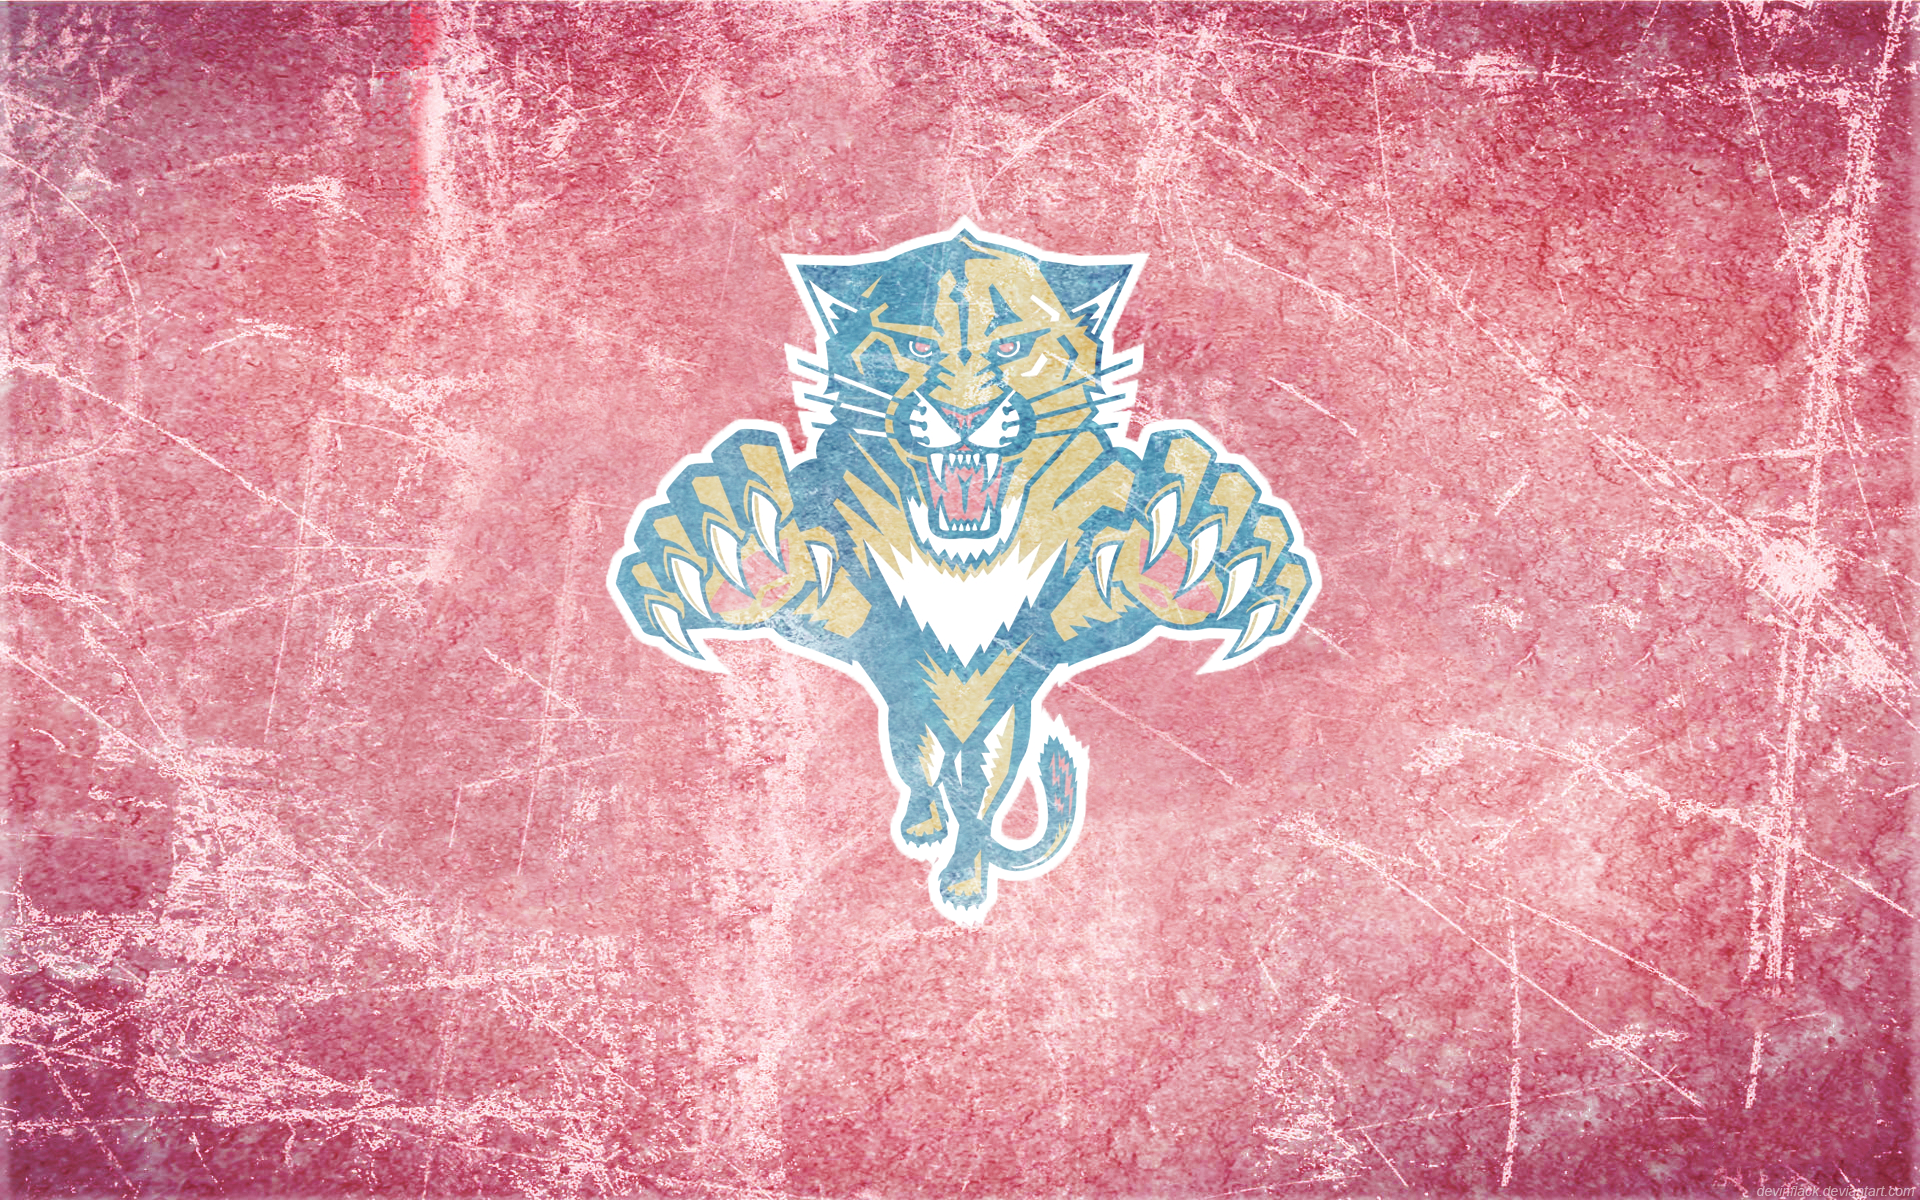 Florida Panthers Wallpaper Ice Hockey Wallpapers Pittsburgh